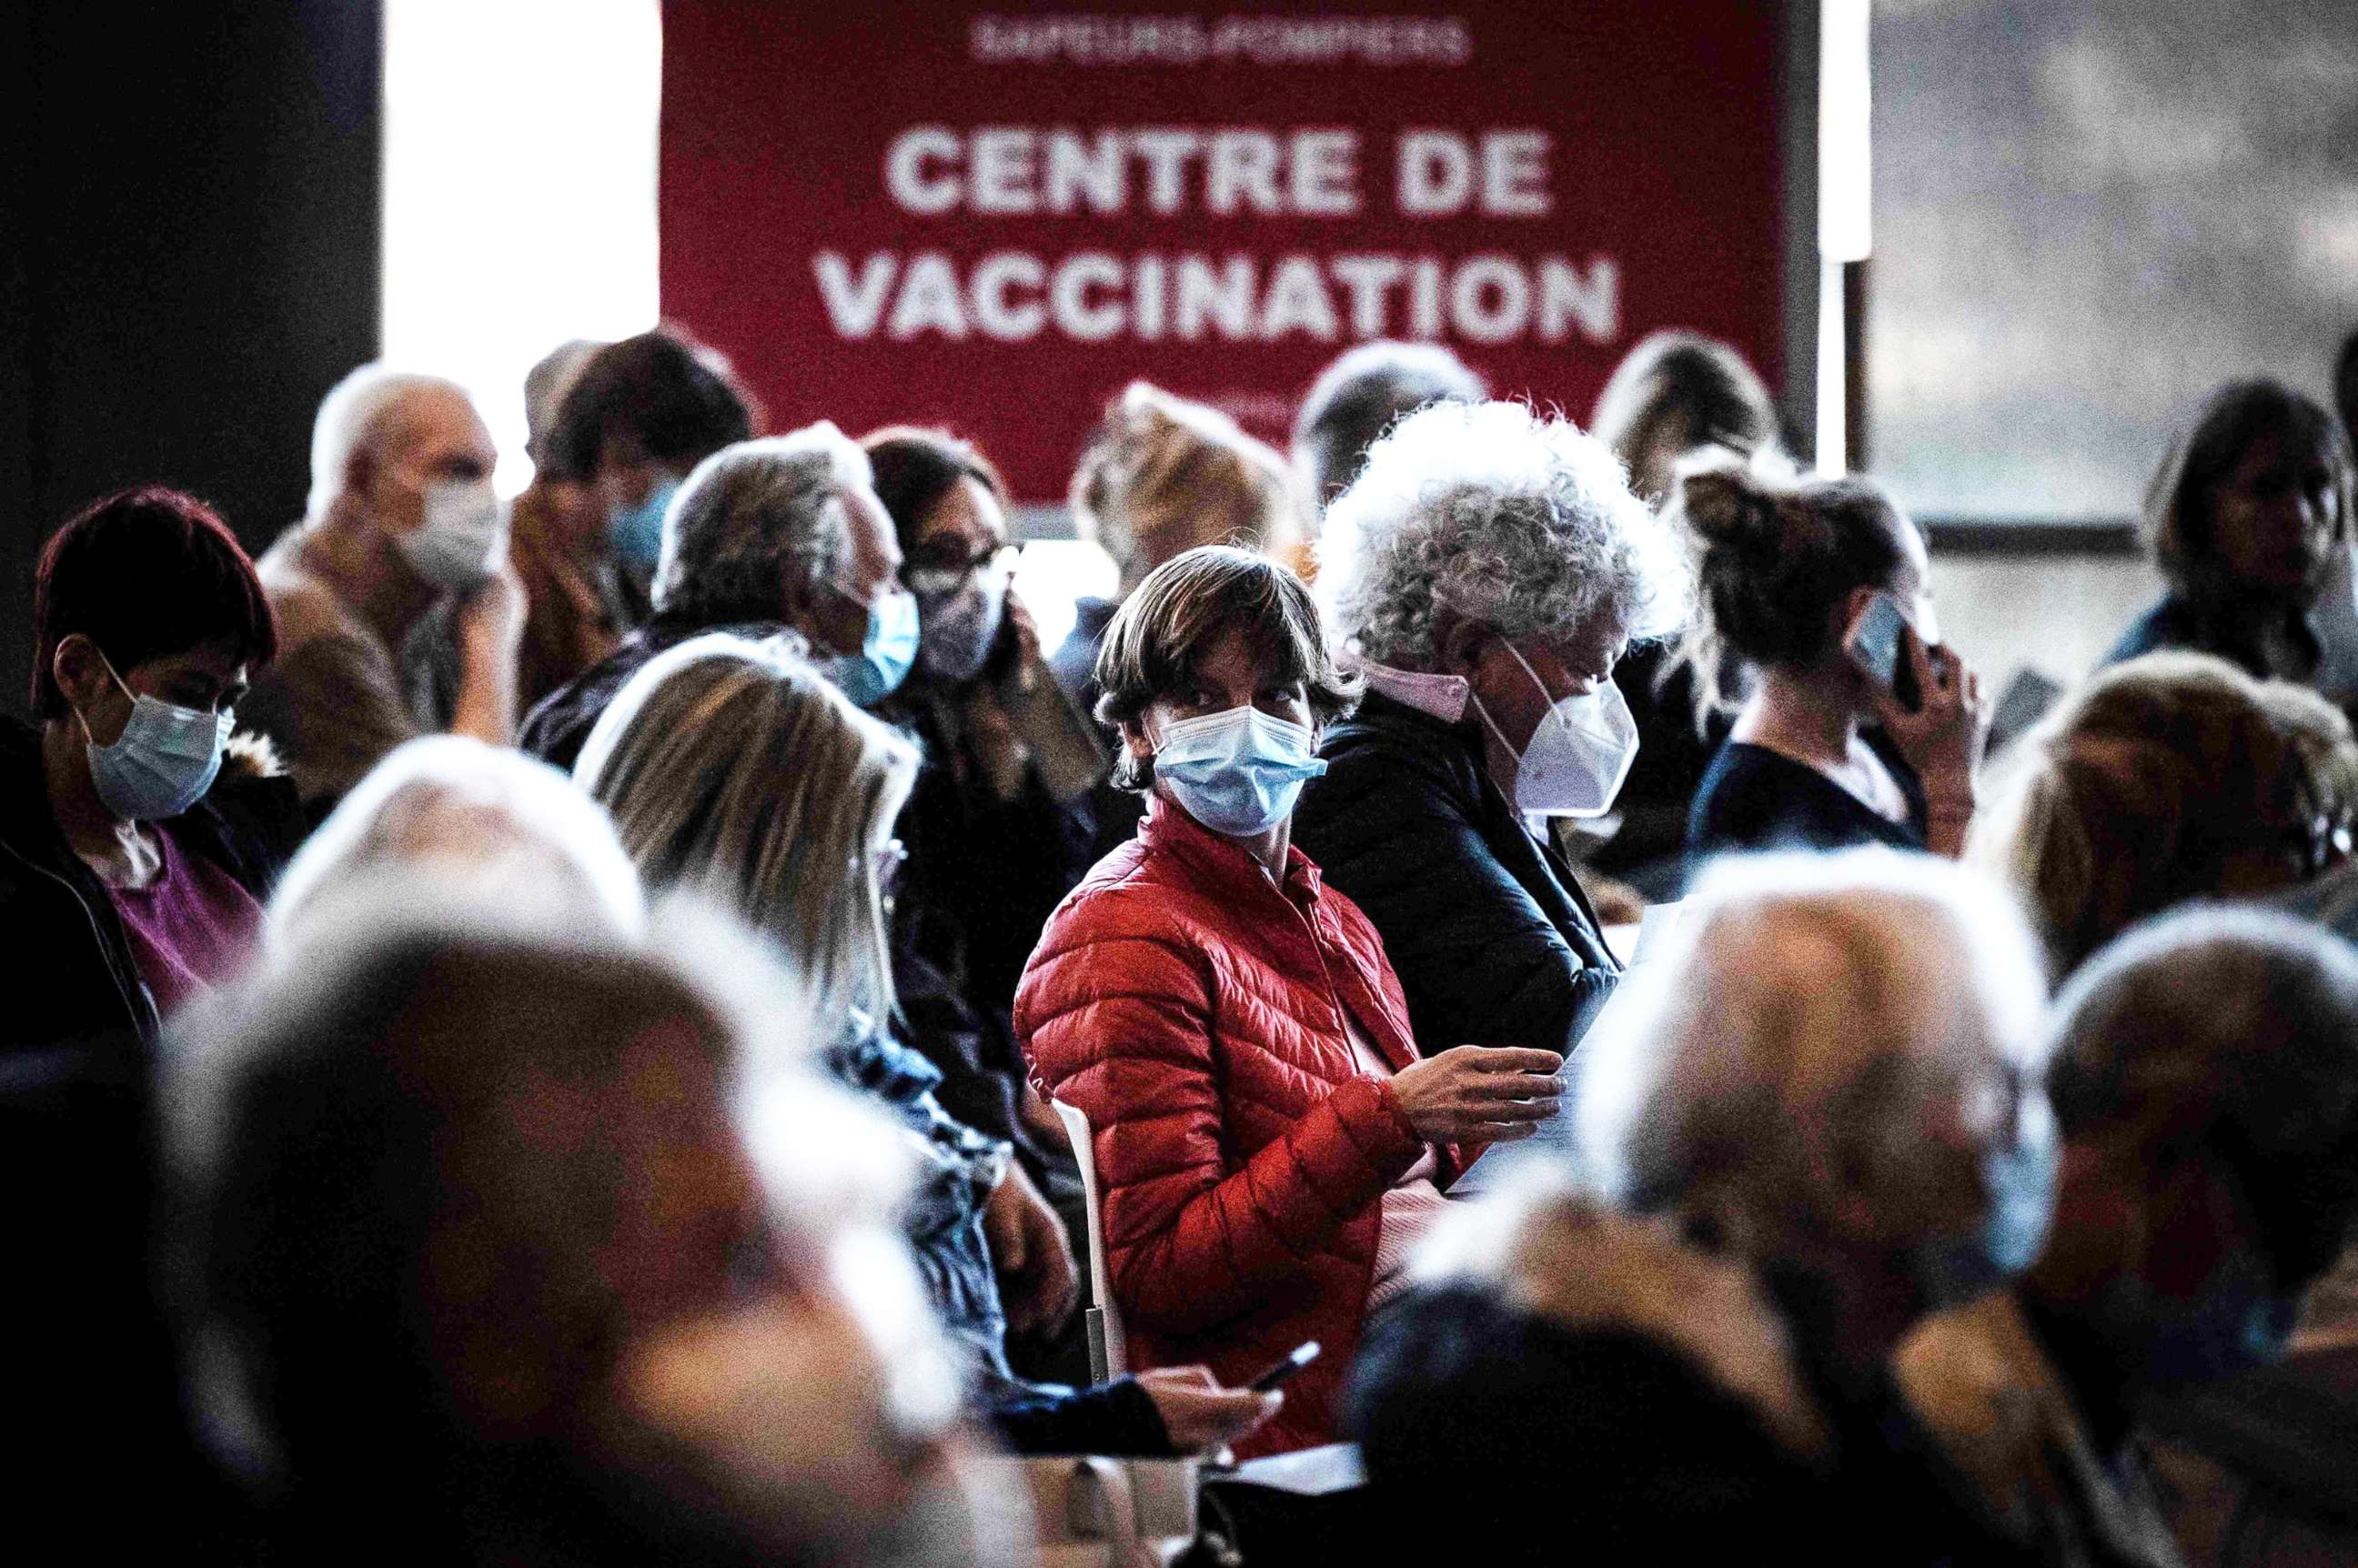 PHOTO: People sit in a waiting area before being vaccinated against COVID-19 on the opening day of a mass vaccination center set up in the OL Group's Groupama Stadium, in Decines-Charpieu, on April 3, 2021.